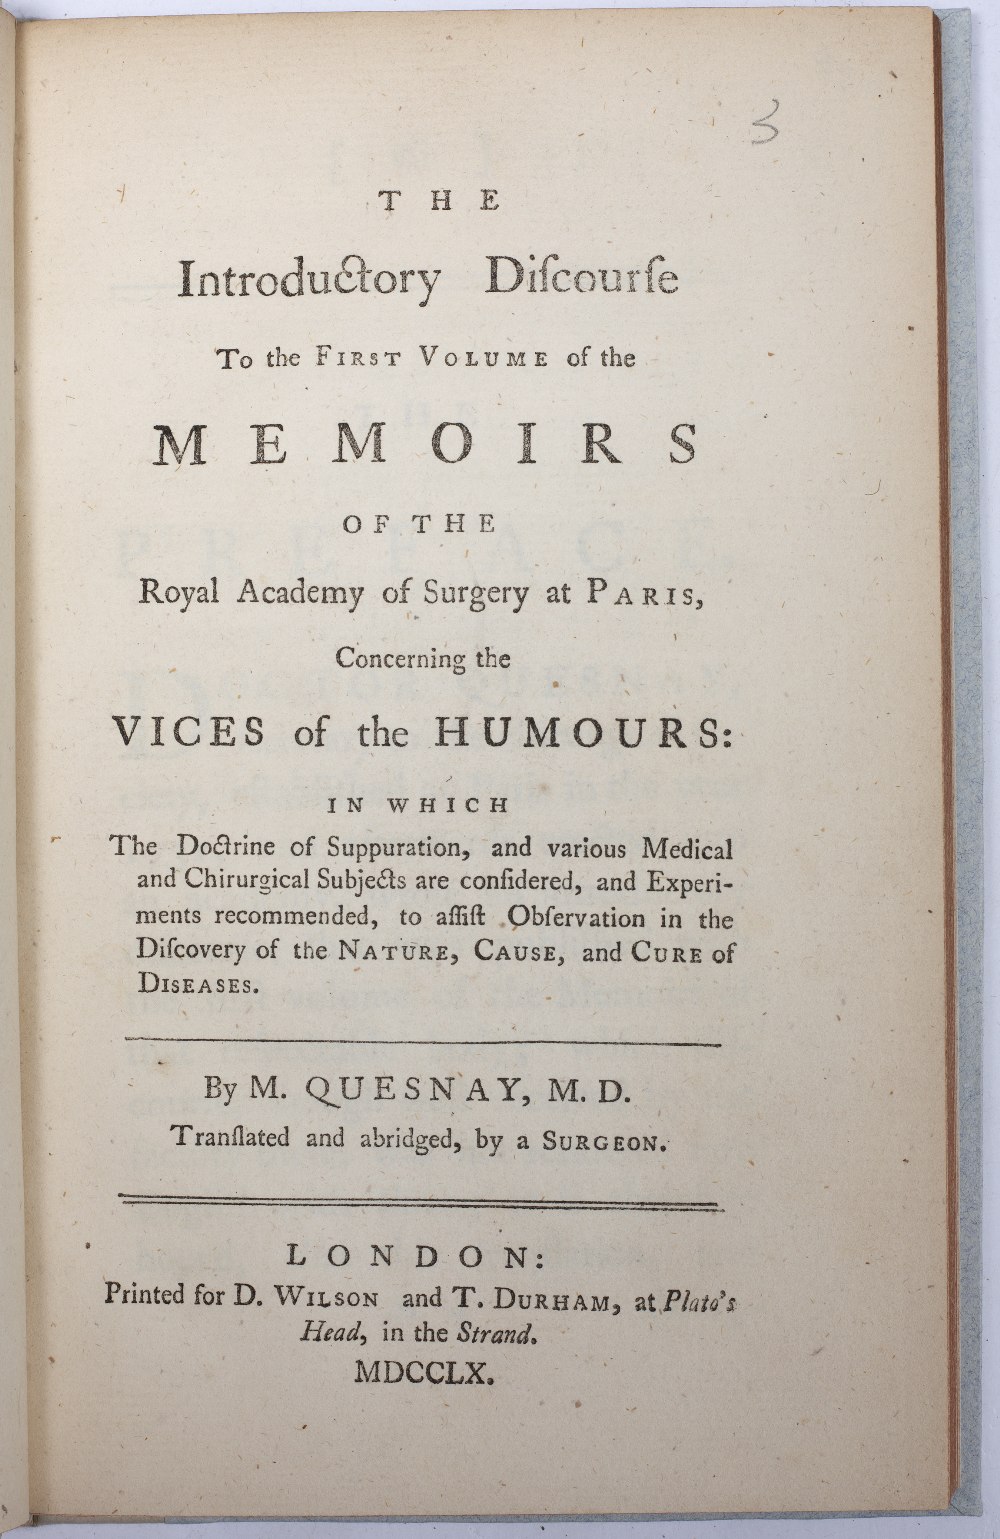 TWO 18TH CENTURY MEDICAL PAMPHLETS: 'Anti-Siris or English Wisdom exlemplify'd by various examples